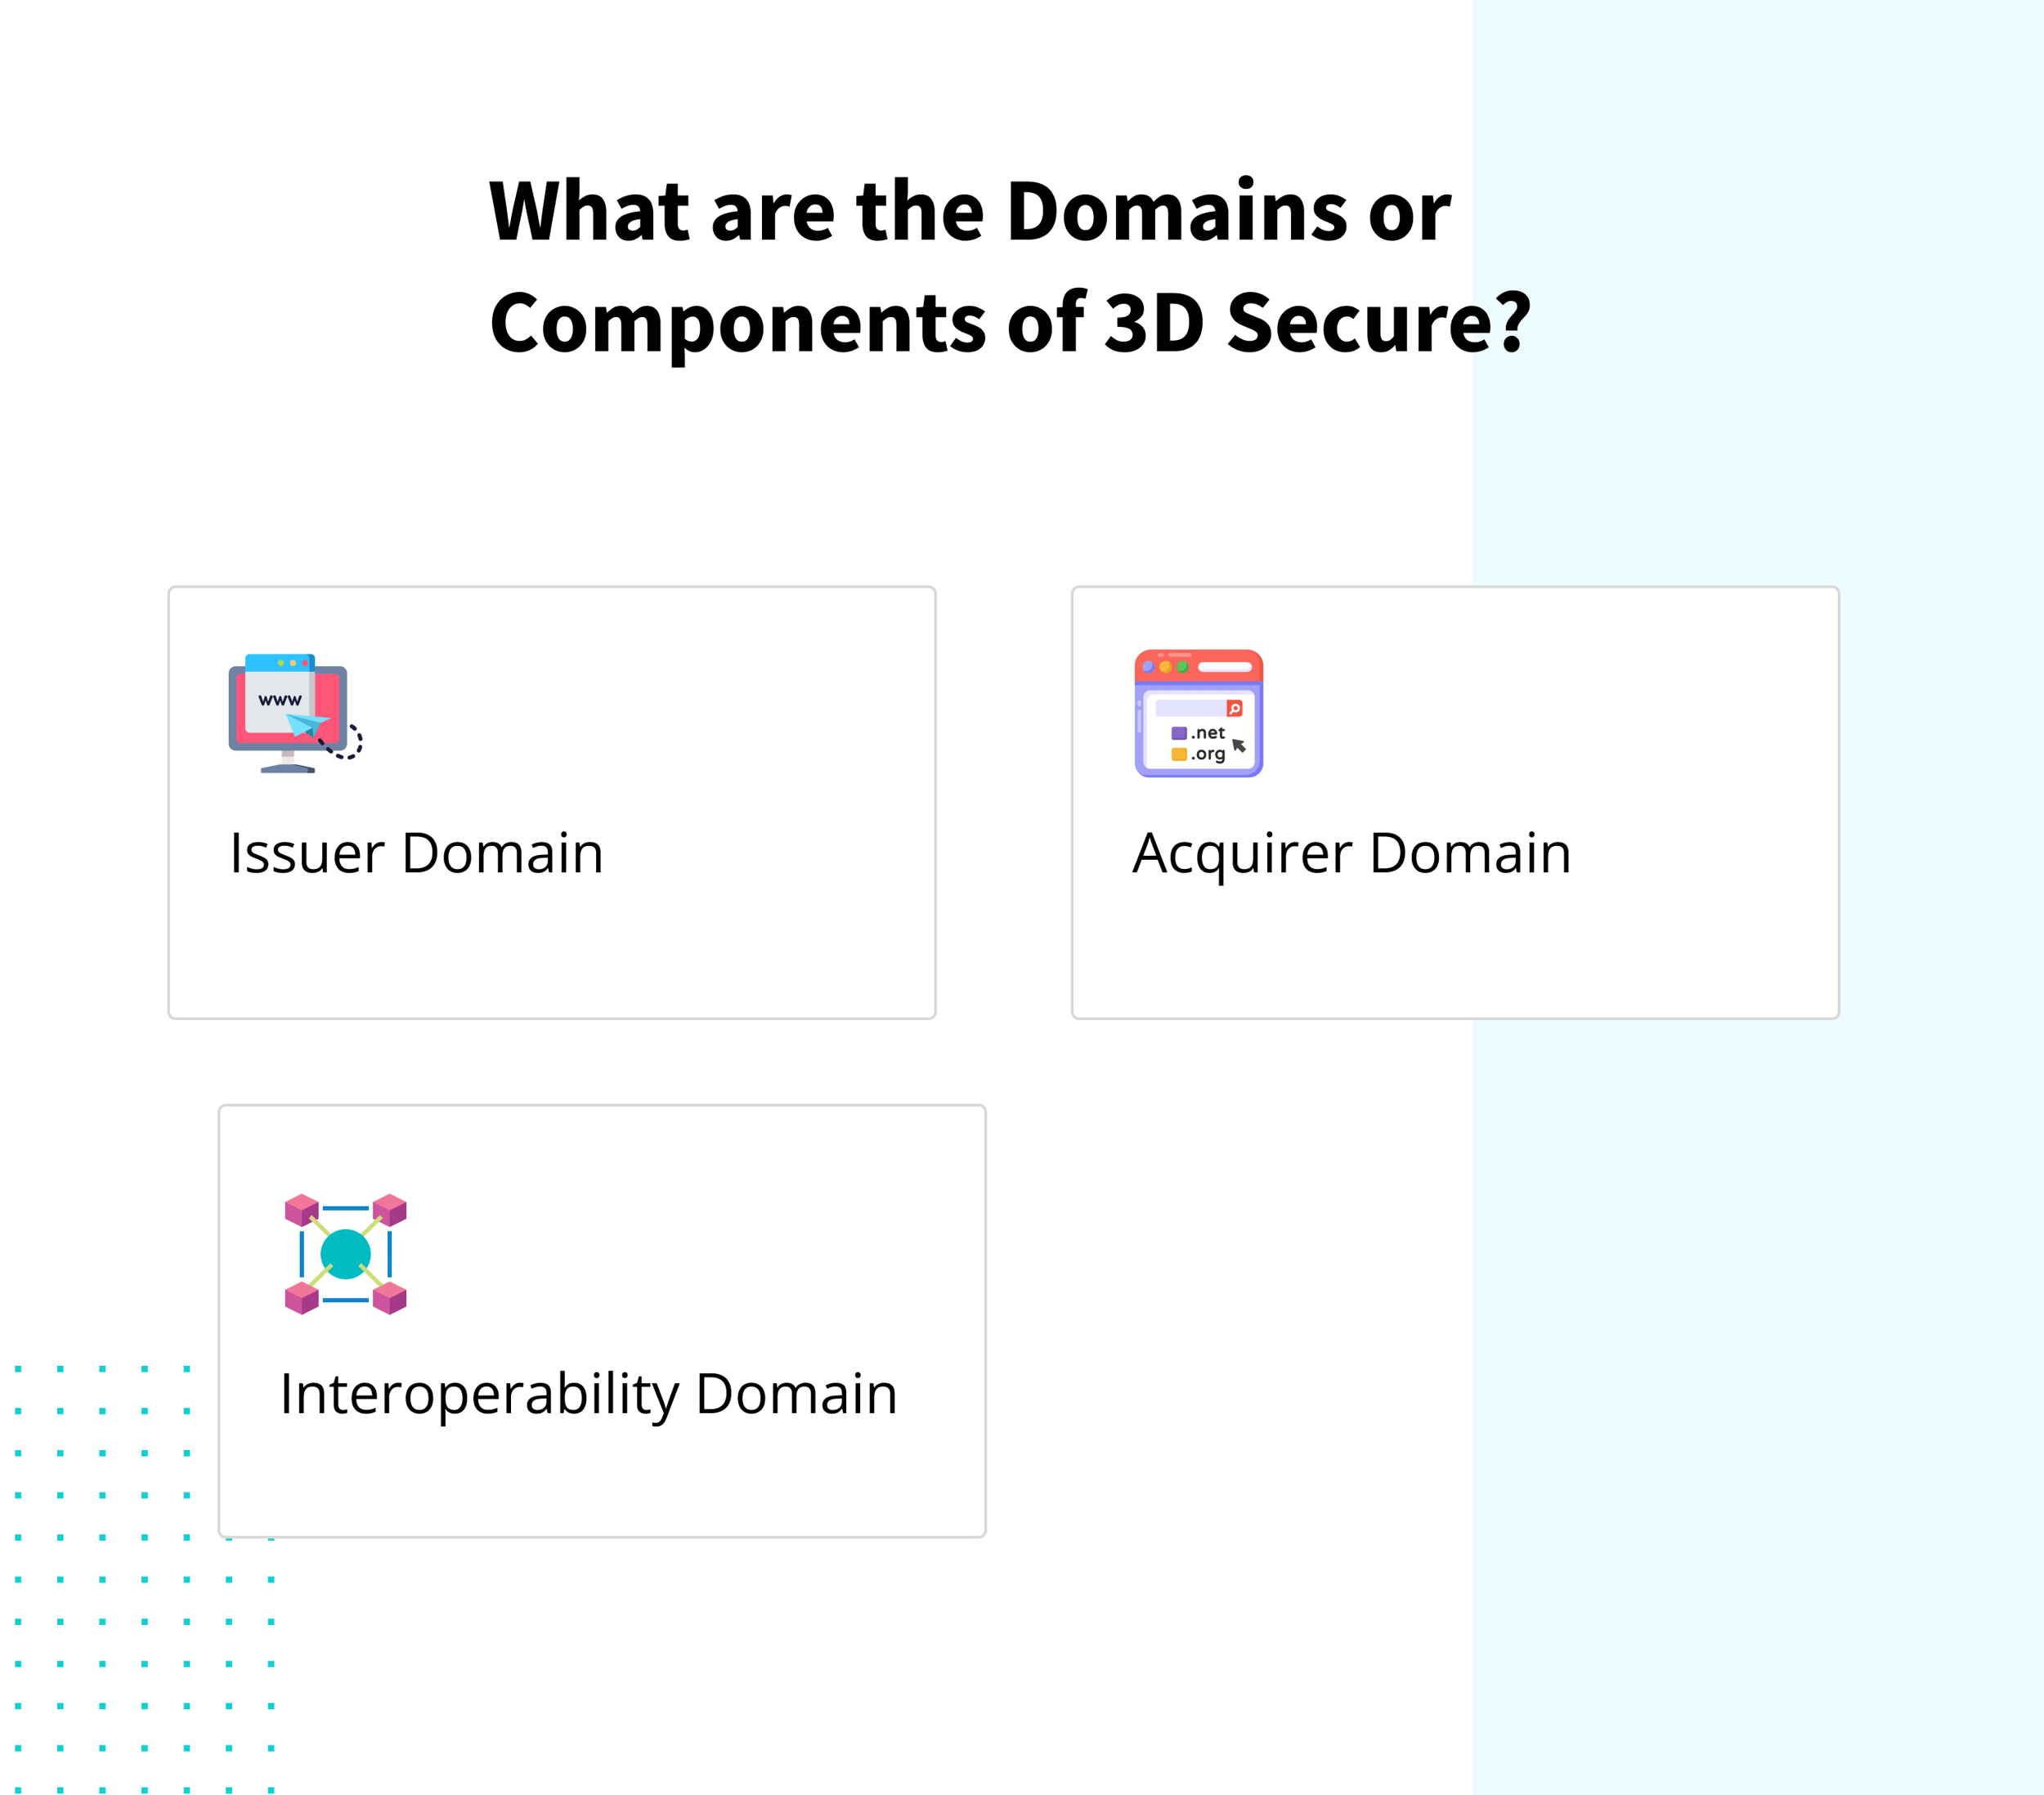 Components of 3D Secure